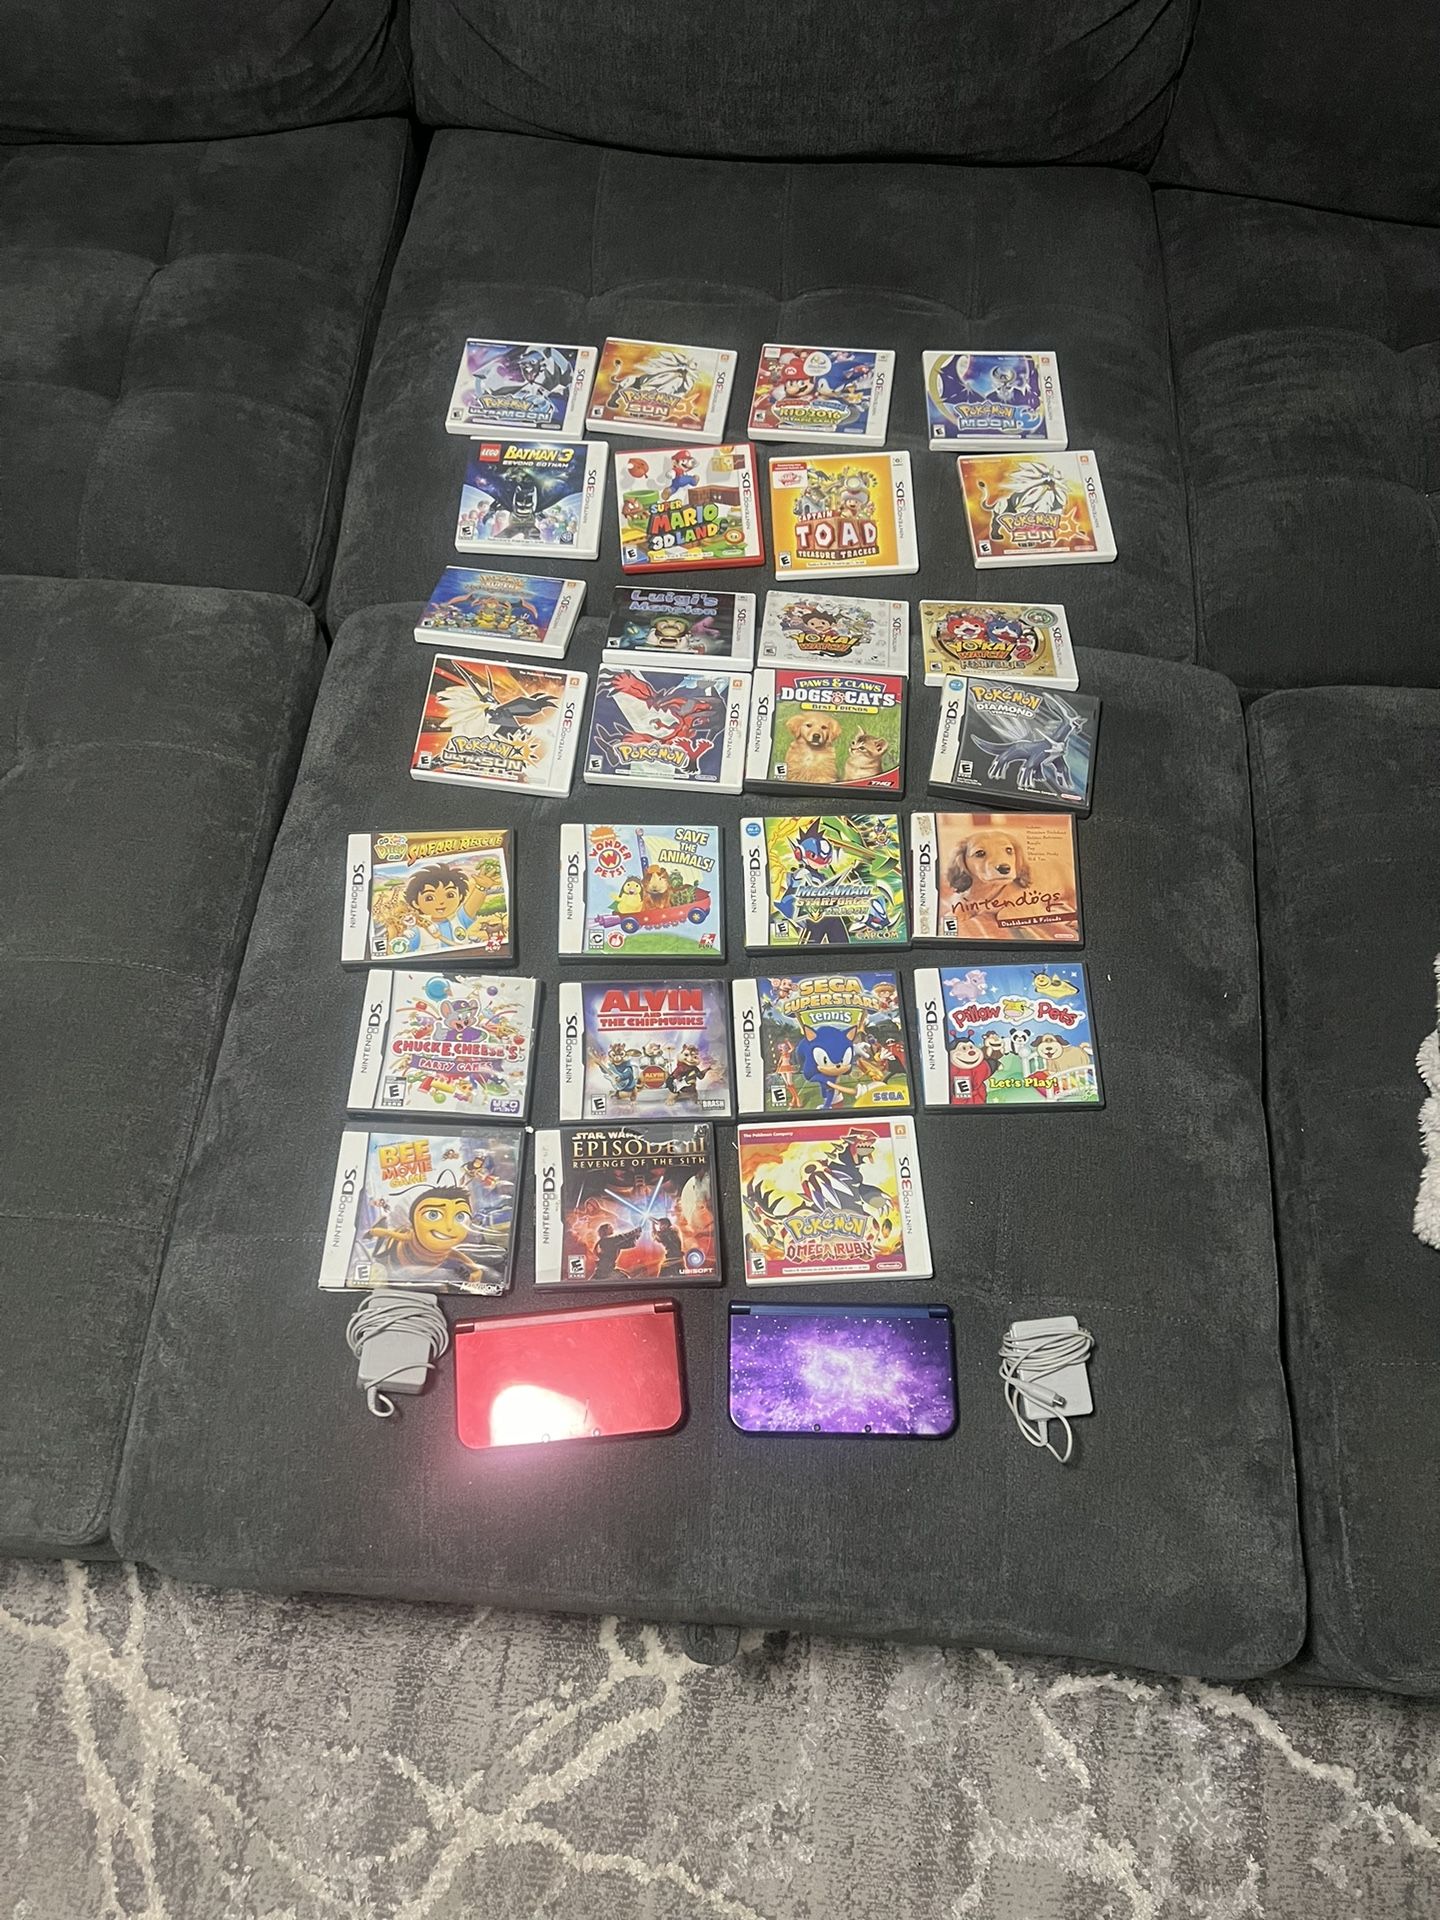 Only Games Available Both Ds's Sold